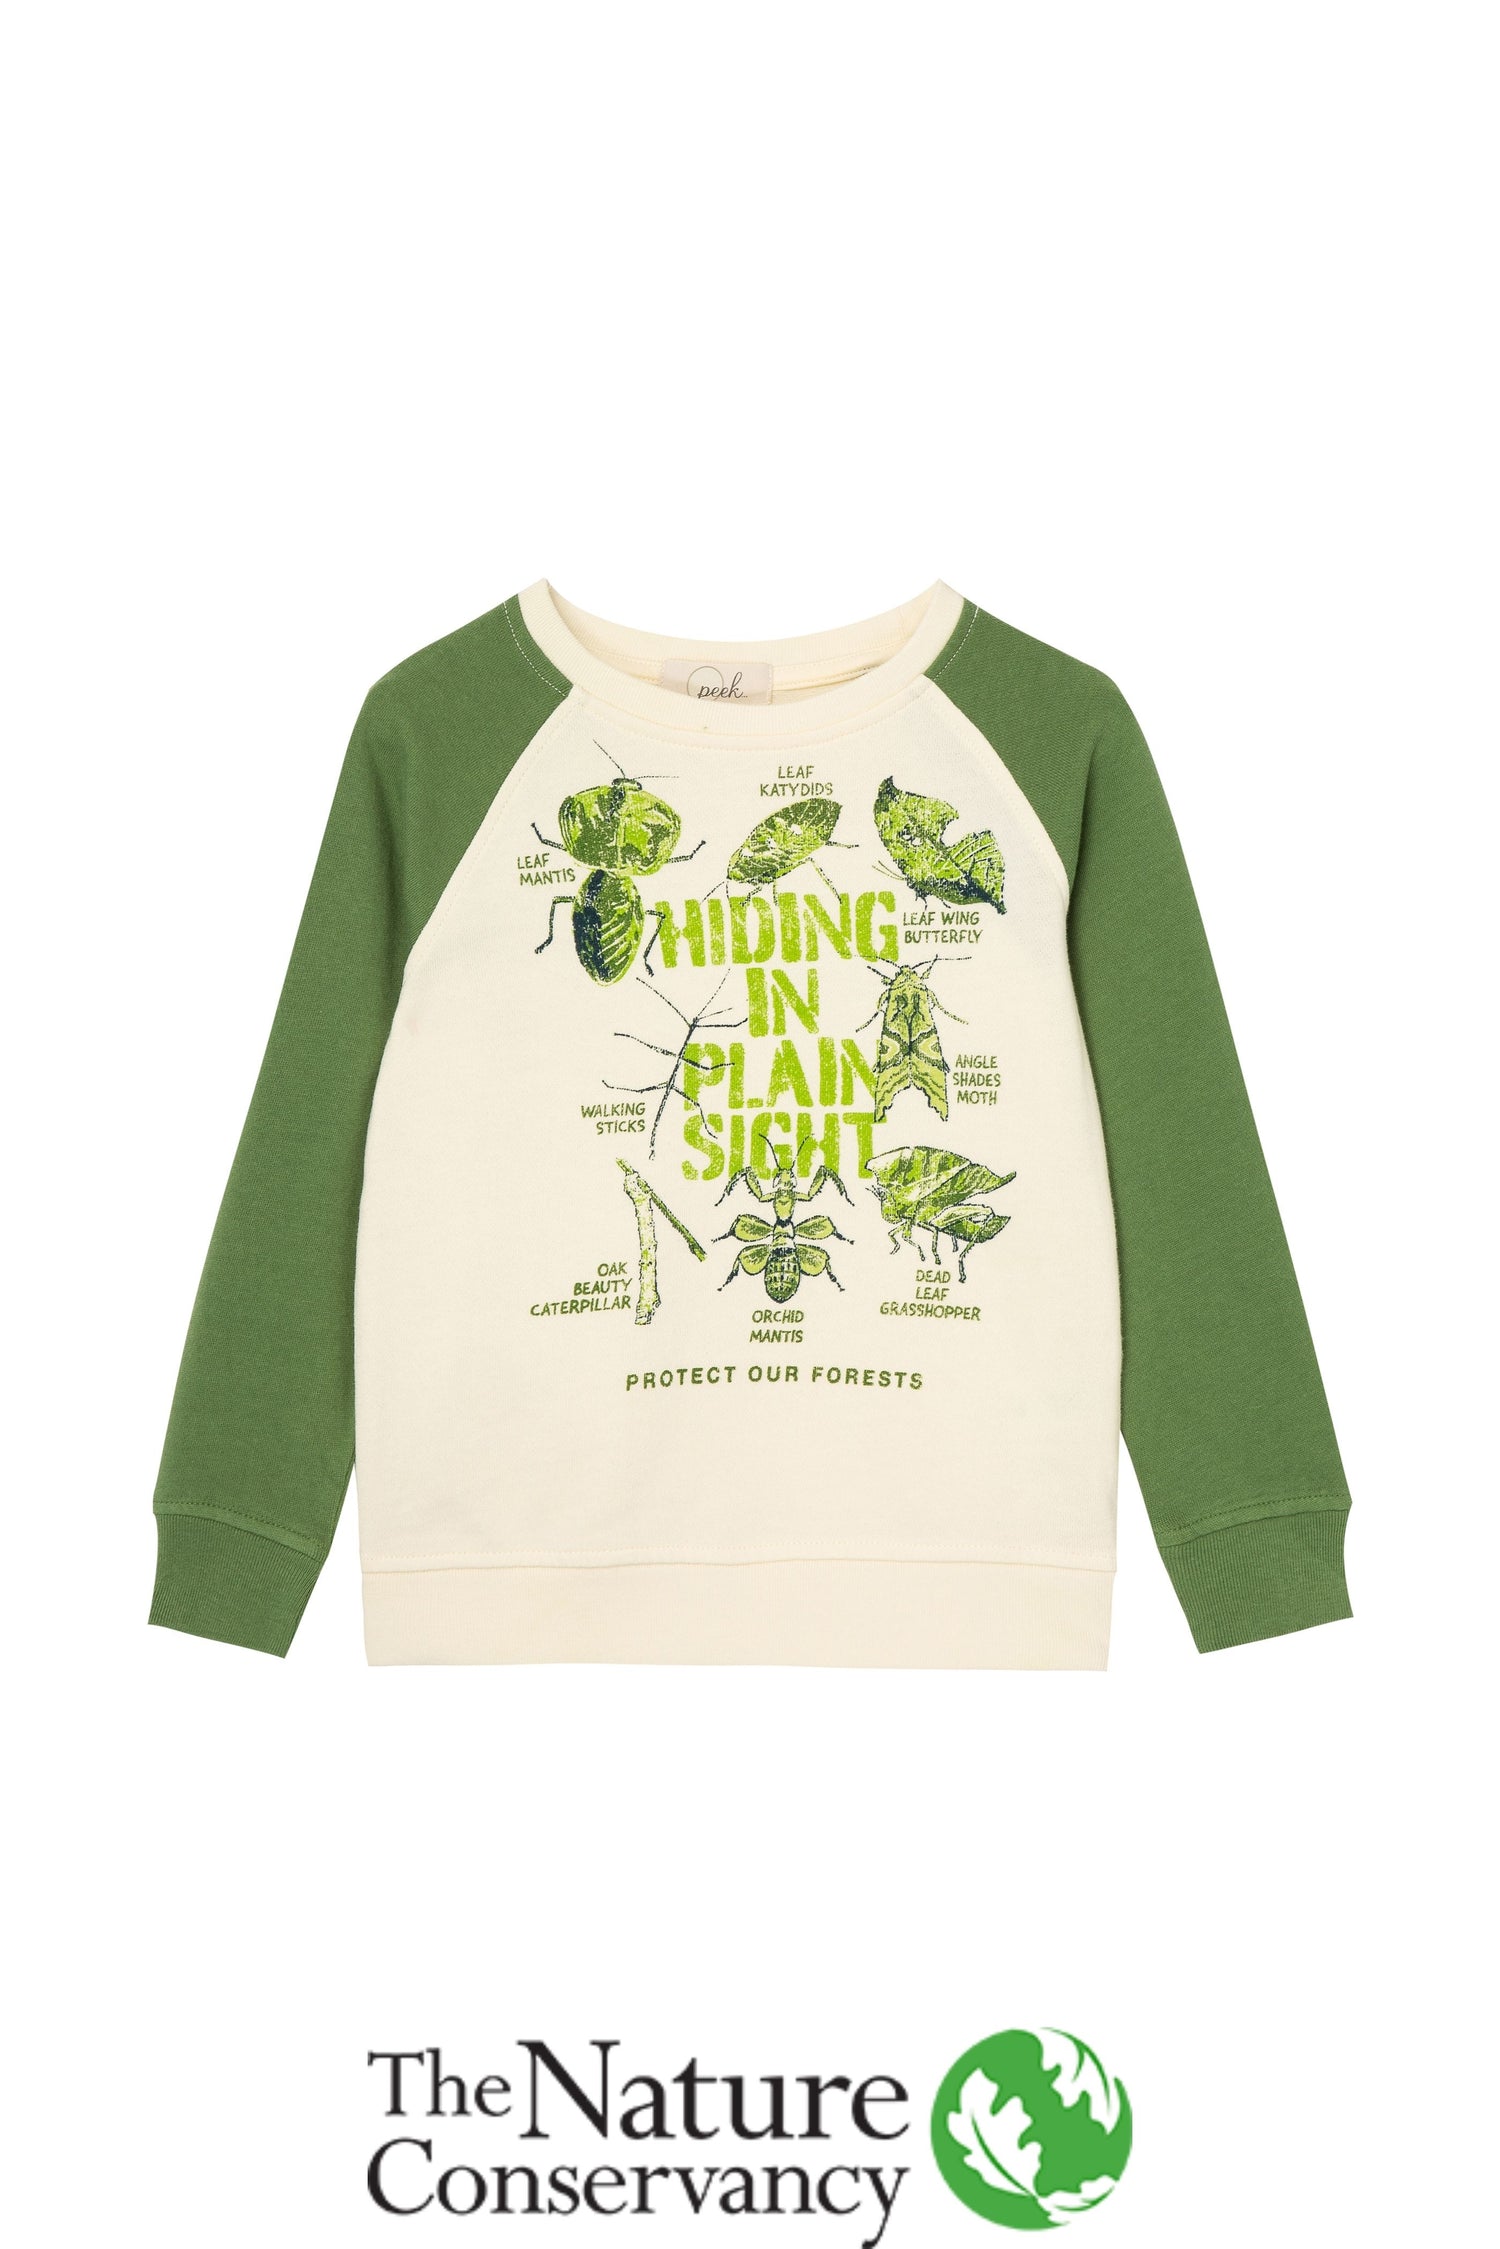 Green and white sweatshirt with illustrations of various green-colored bugs 'hiding in plain sight'